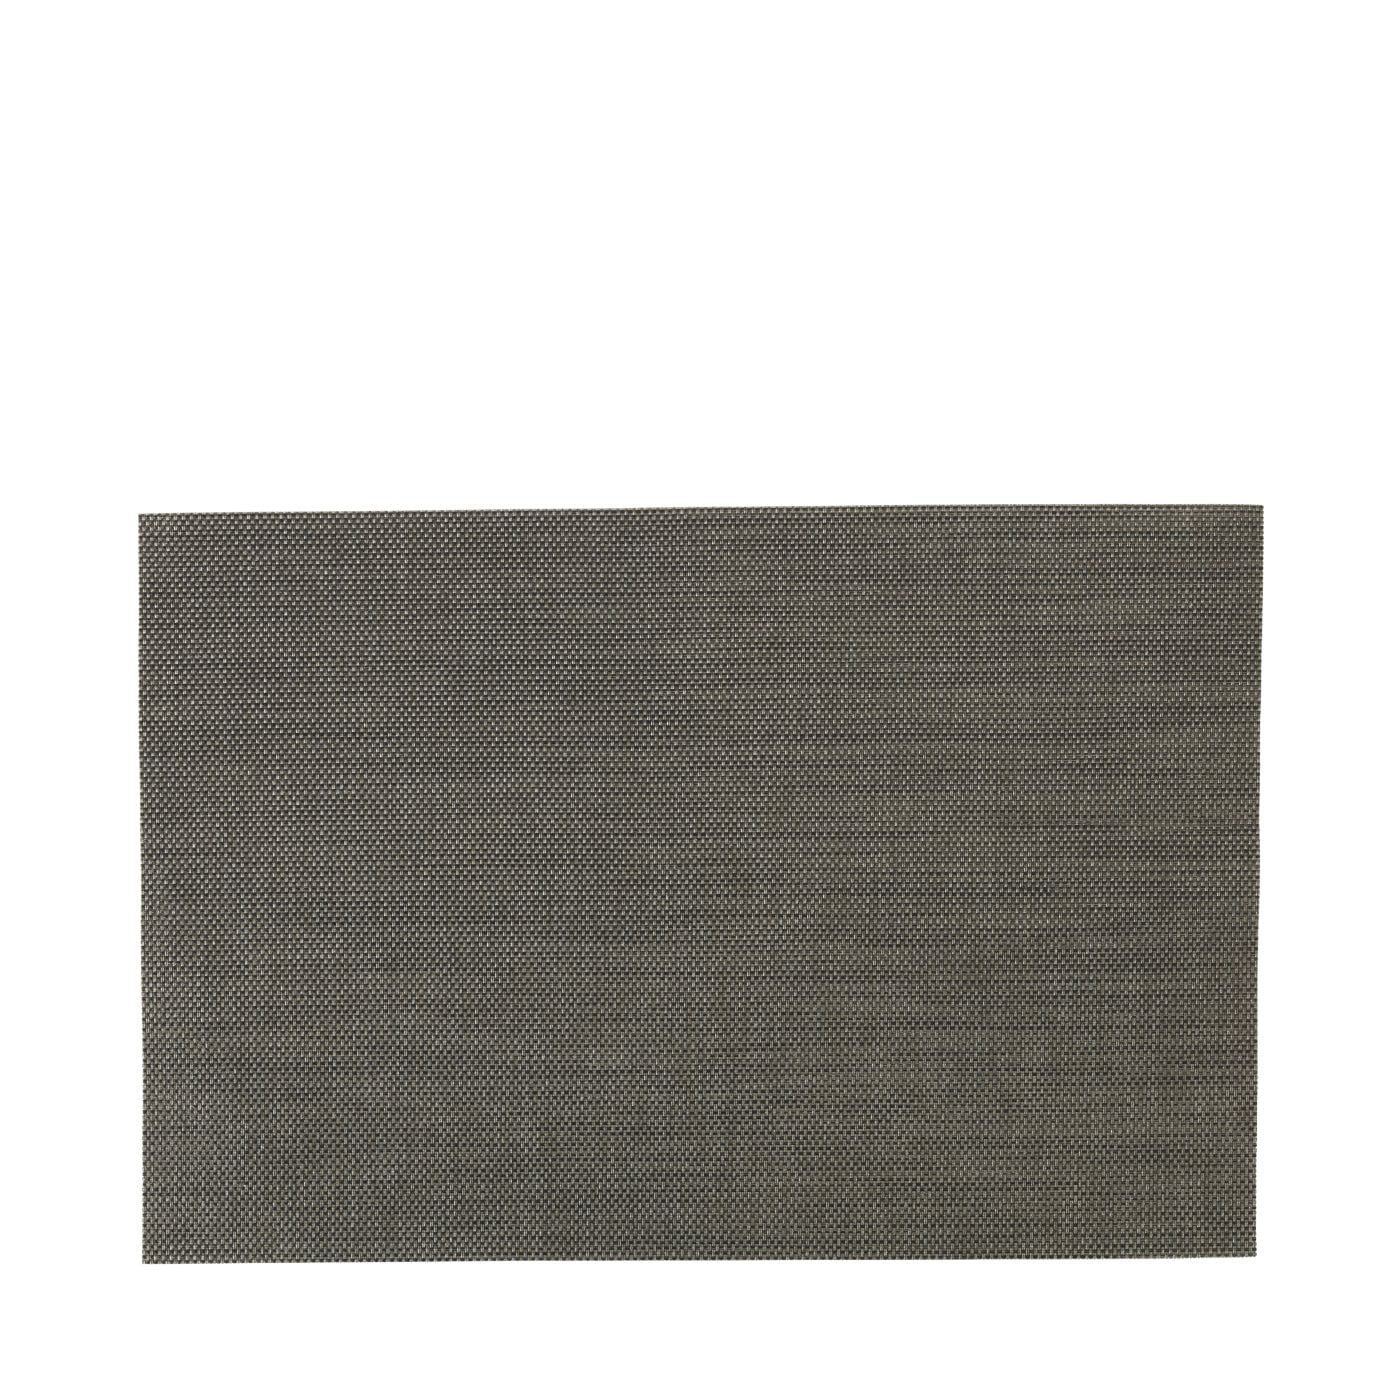 SITO PLACEMATS - SET OF 4*